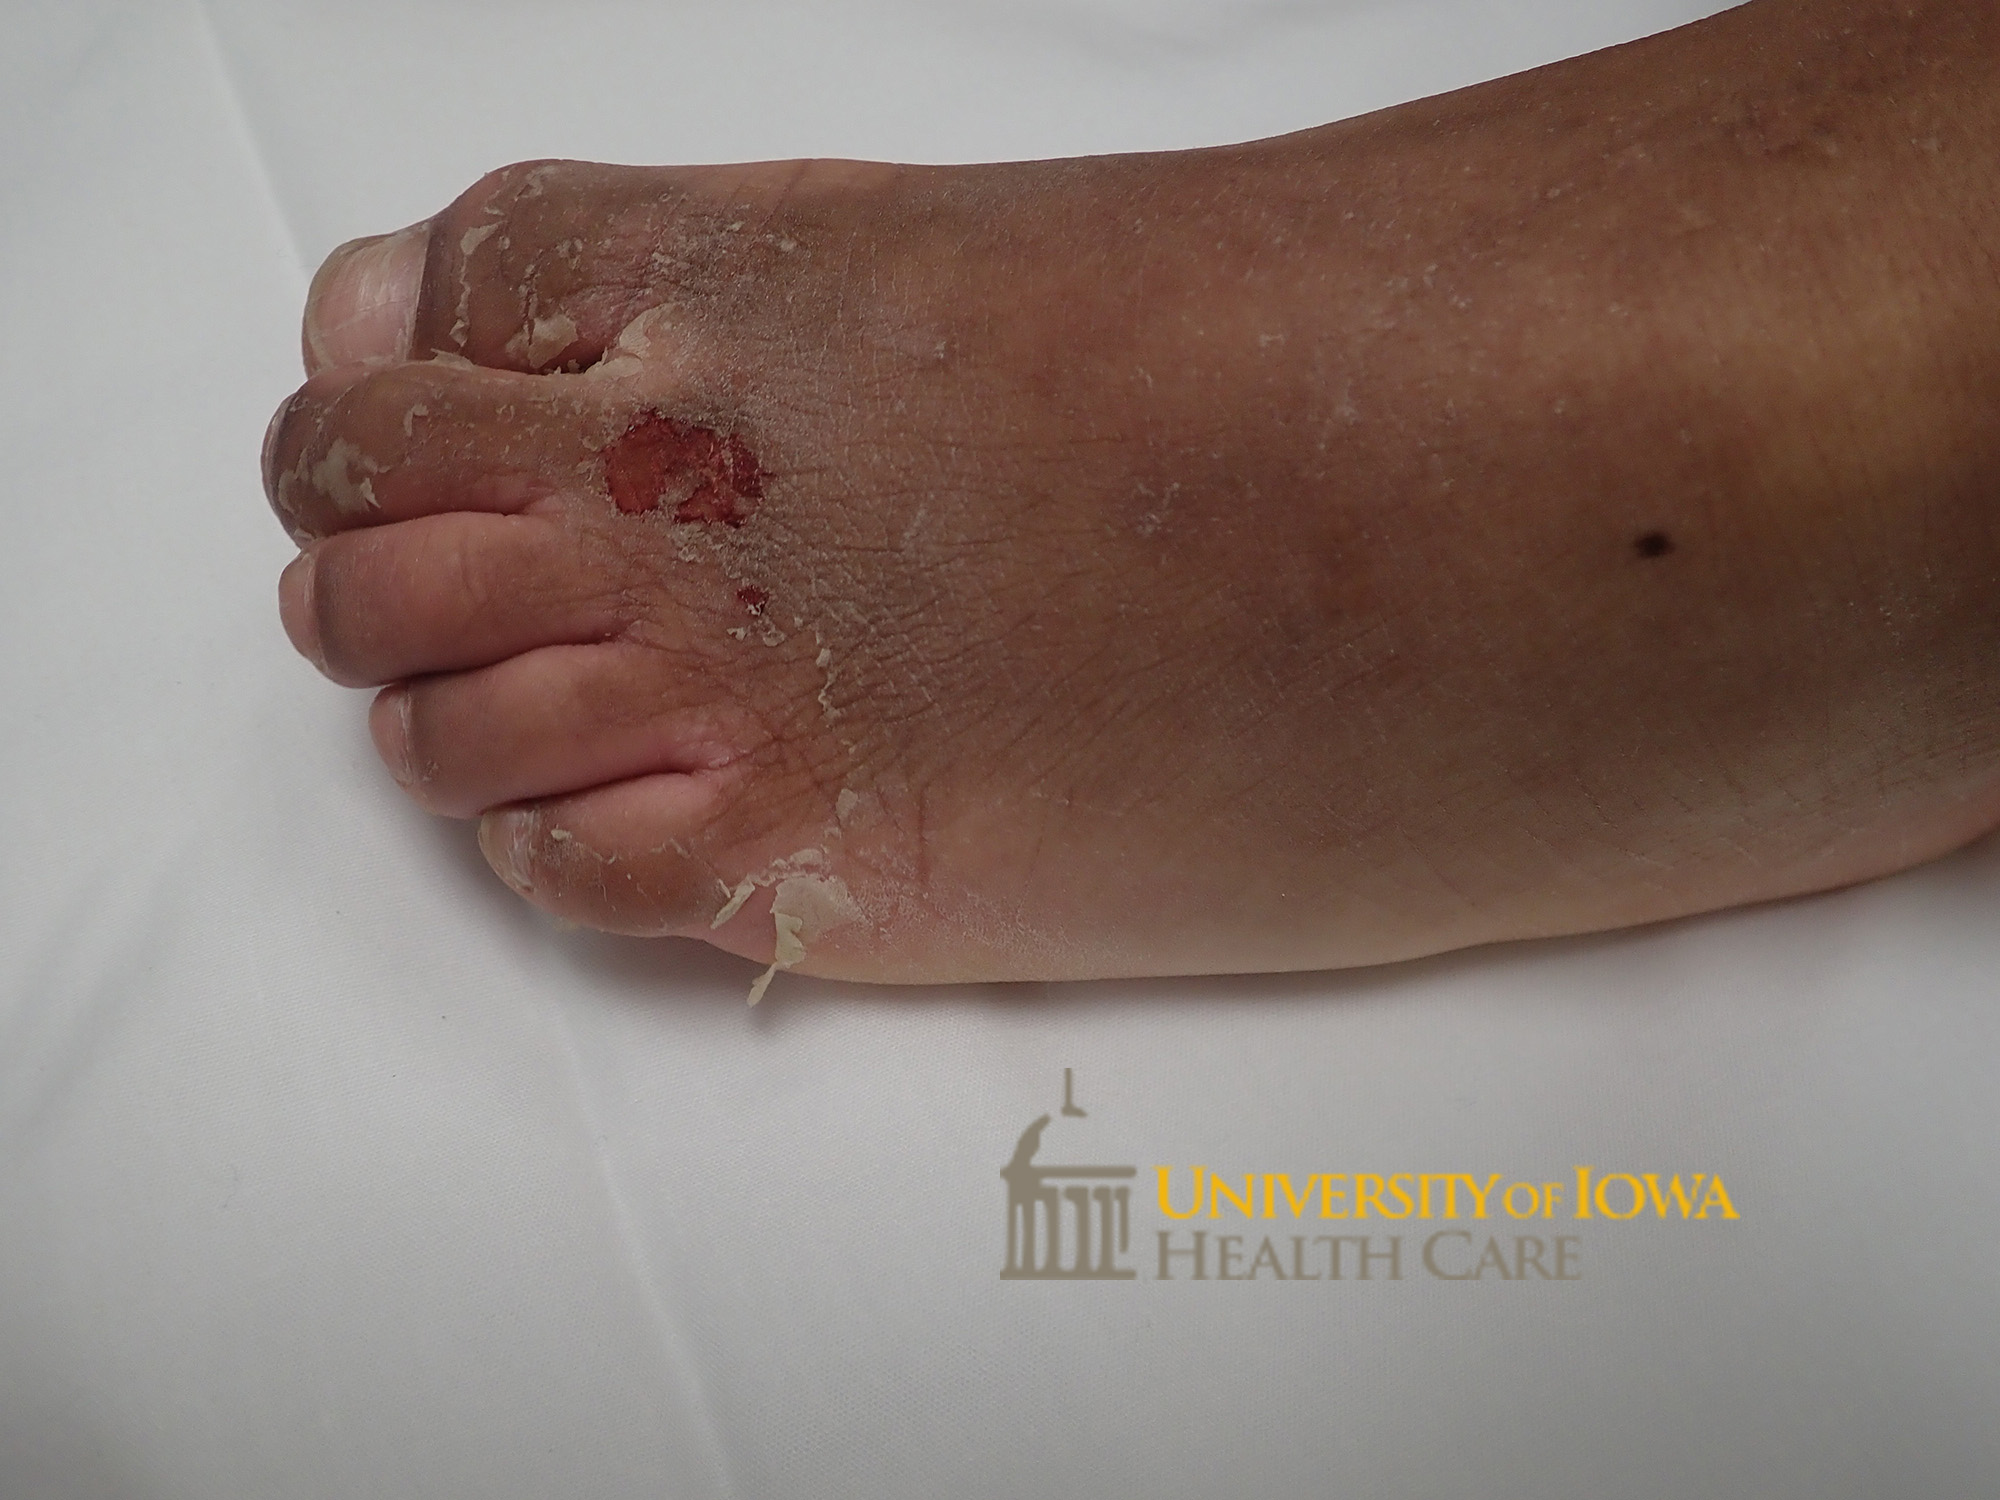 Superficial desquamation and focal area of erosion on the forefoot. (click images for higher resolution).